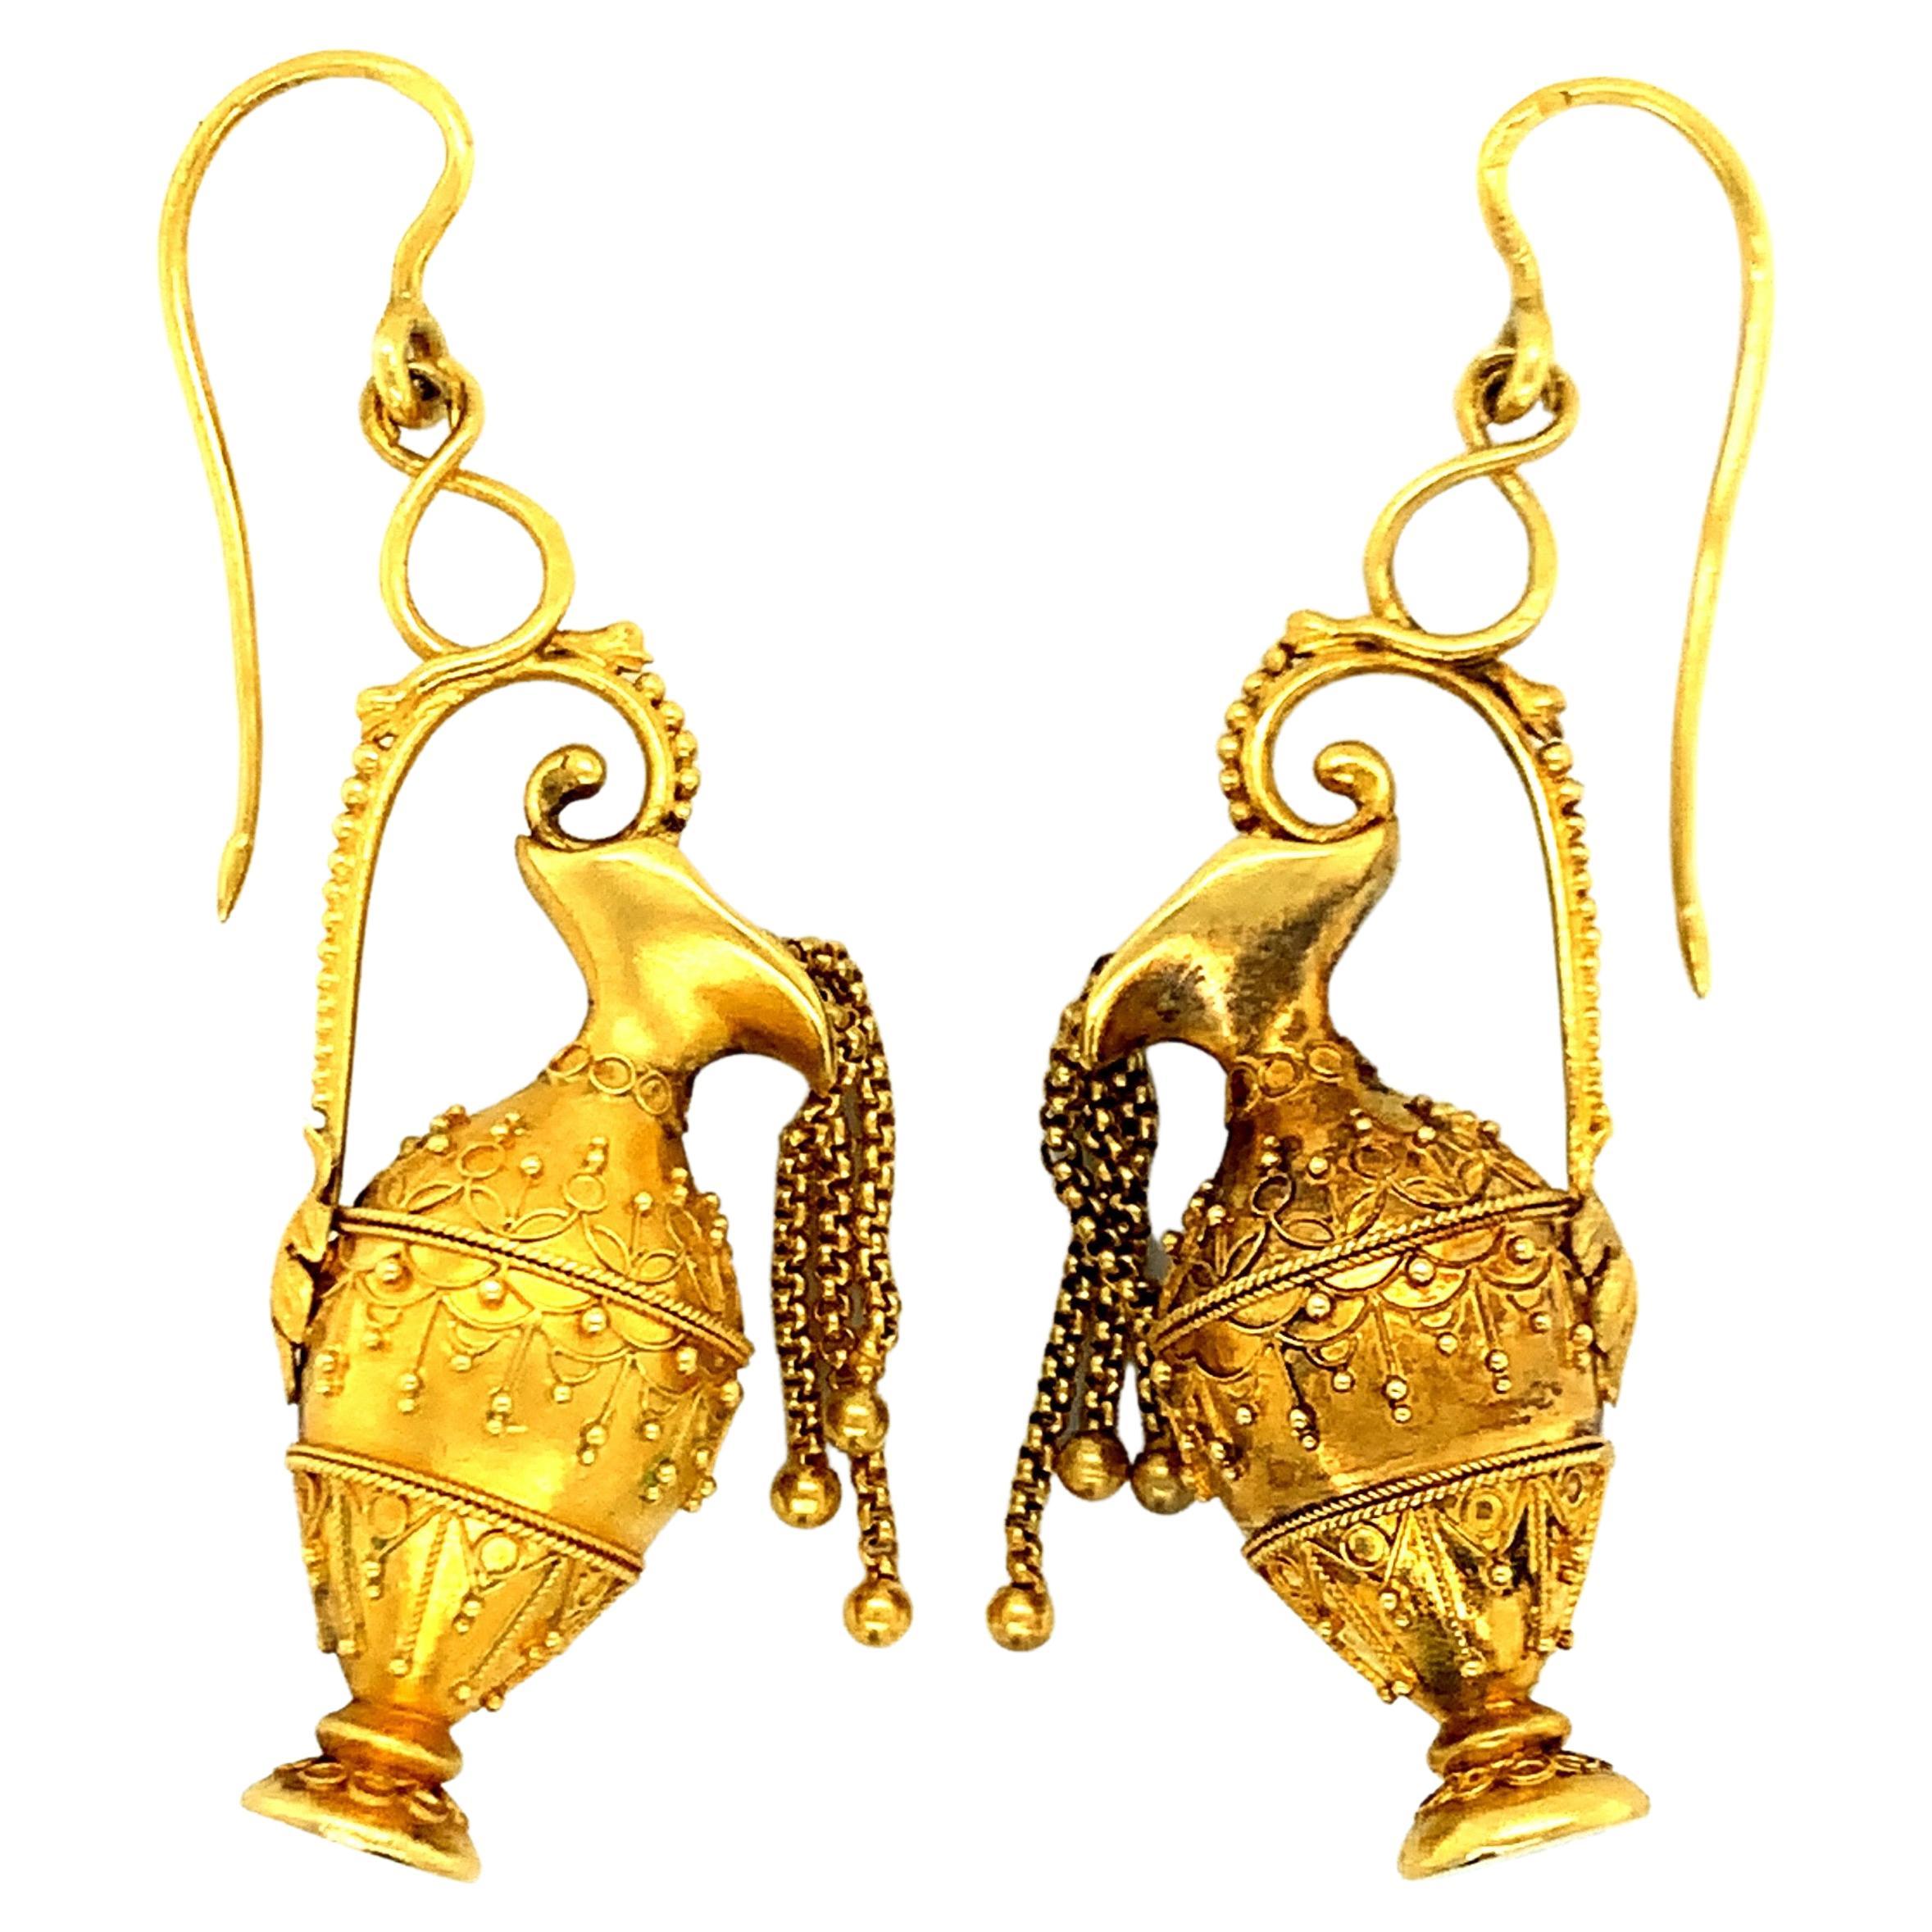 Antique Yellow Gold Vases Earrings